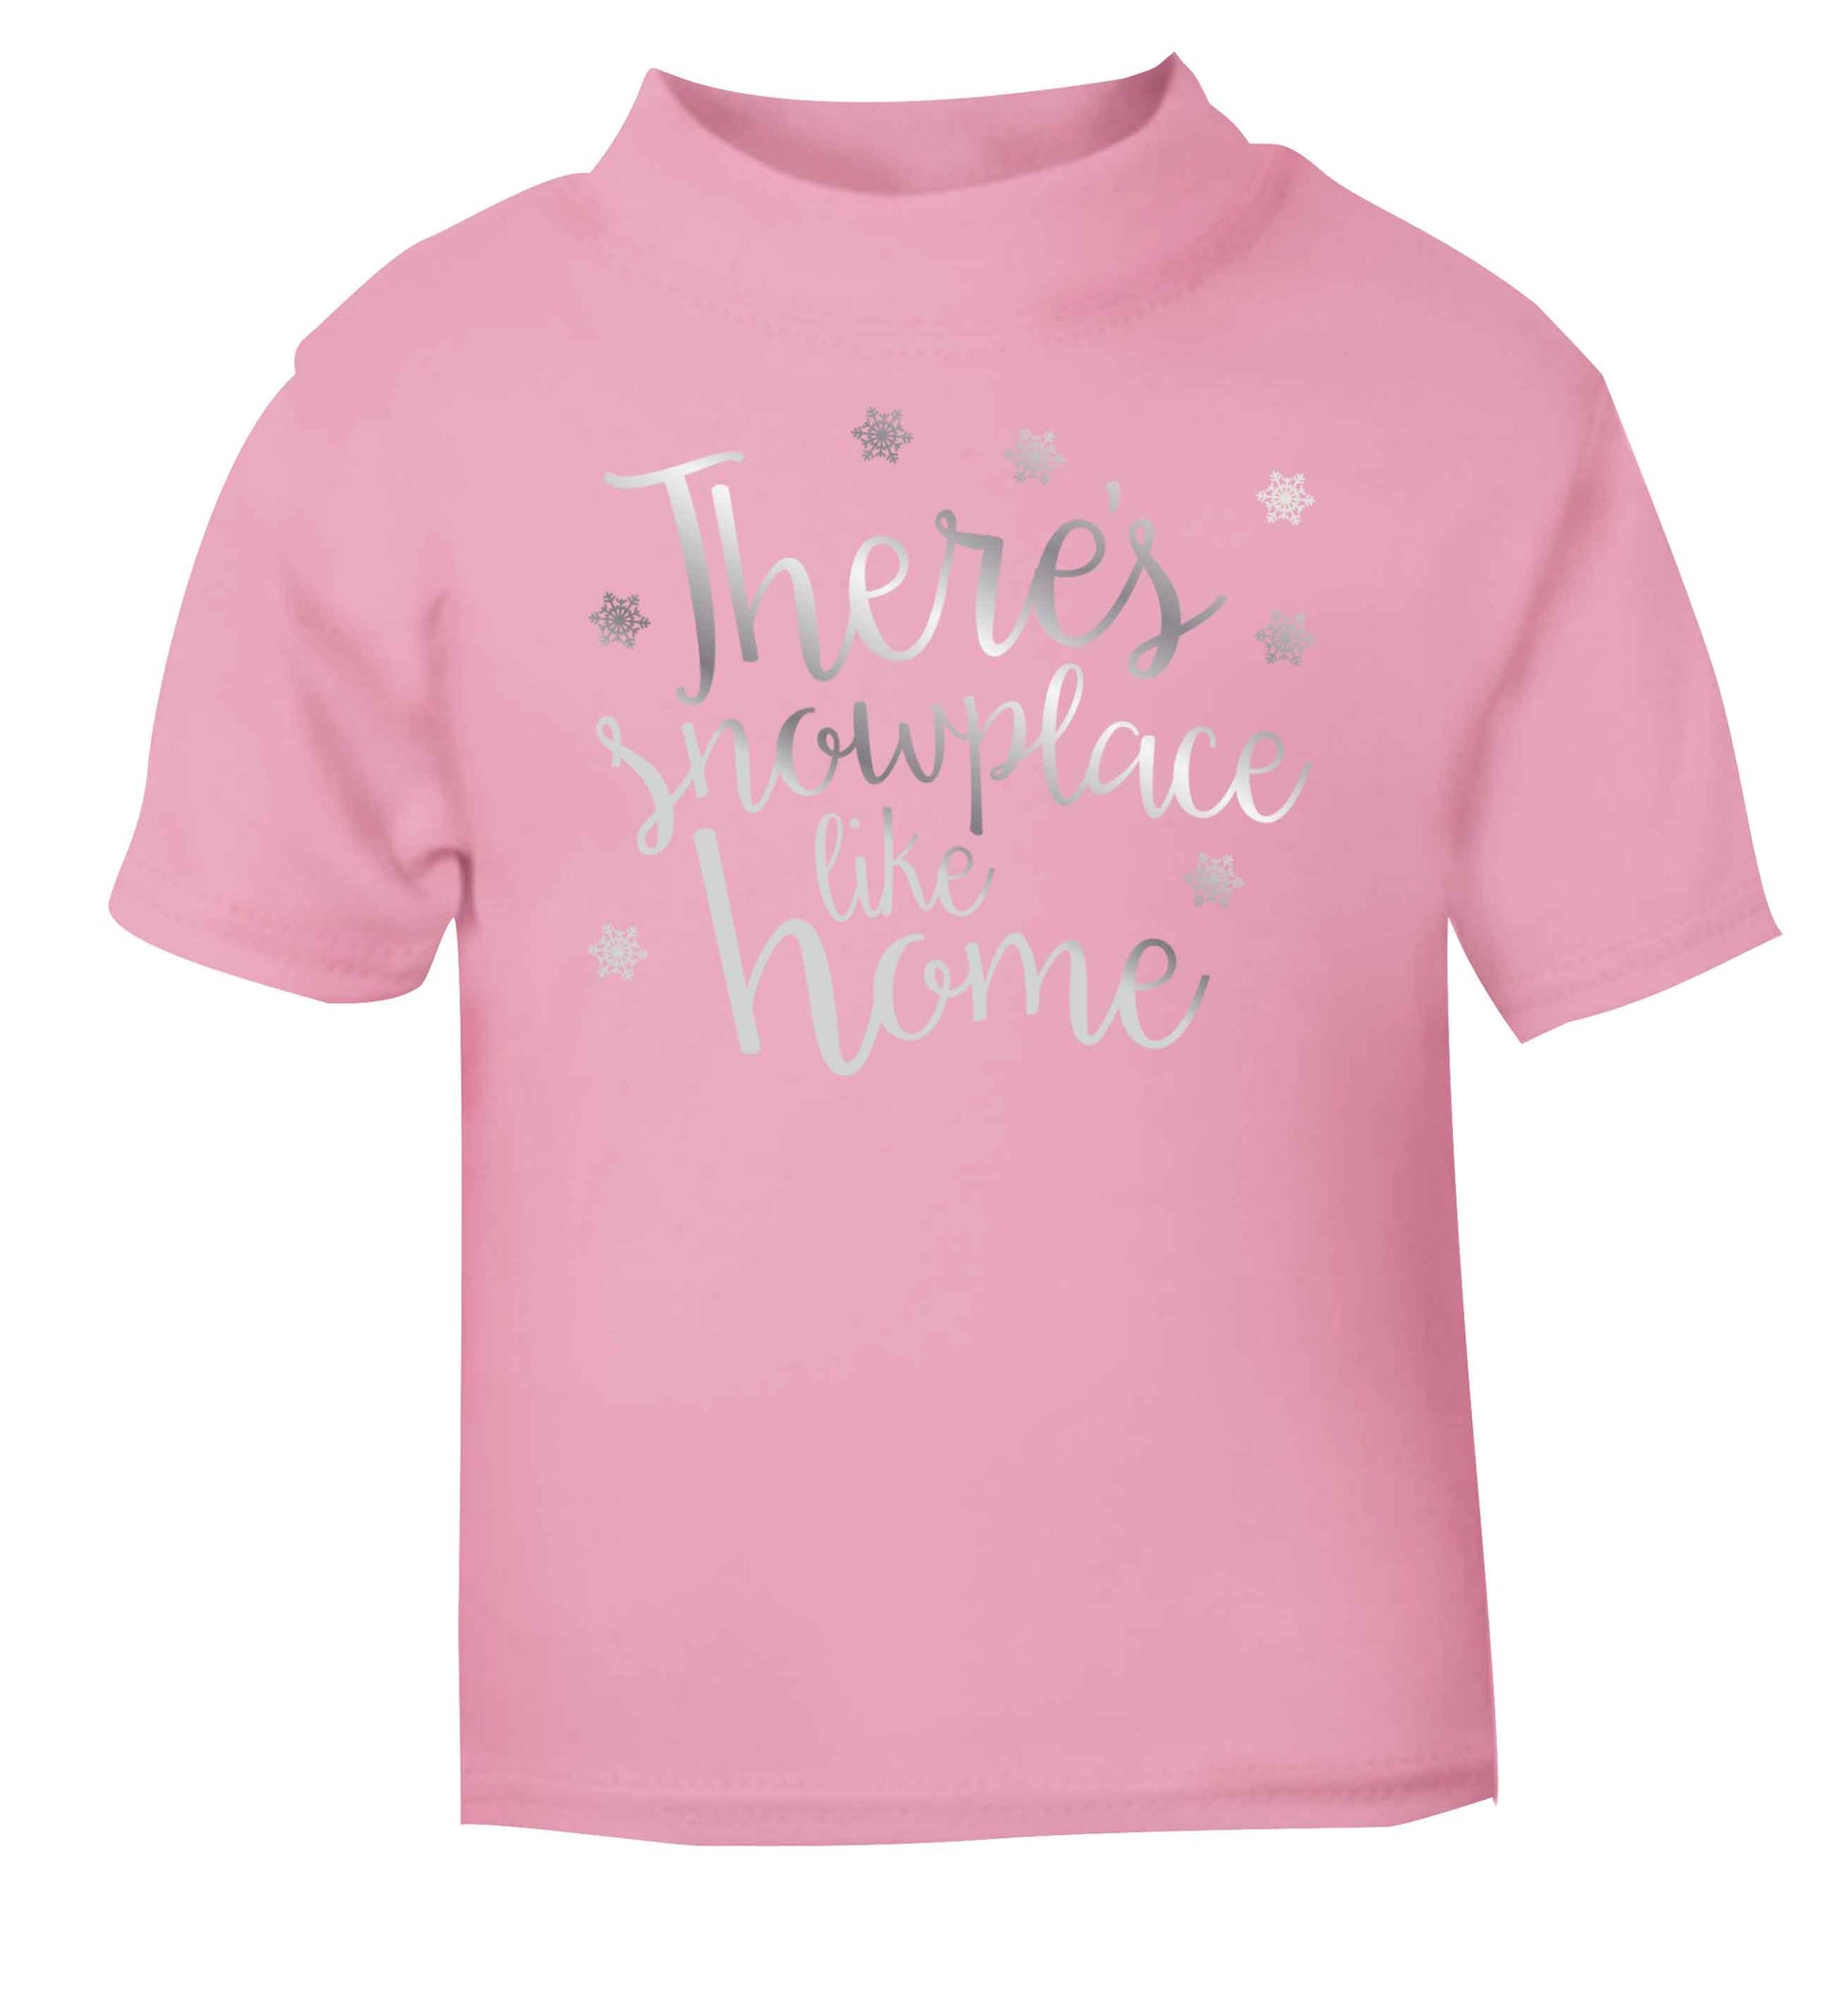 There's snowplace like home - metallic silver light pink baby toddler Tshirt 2 Years